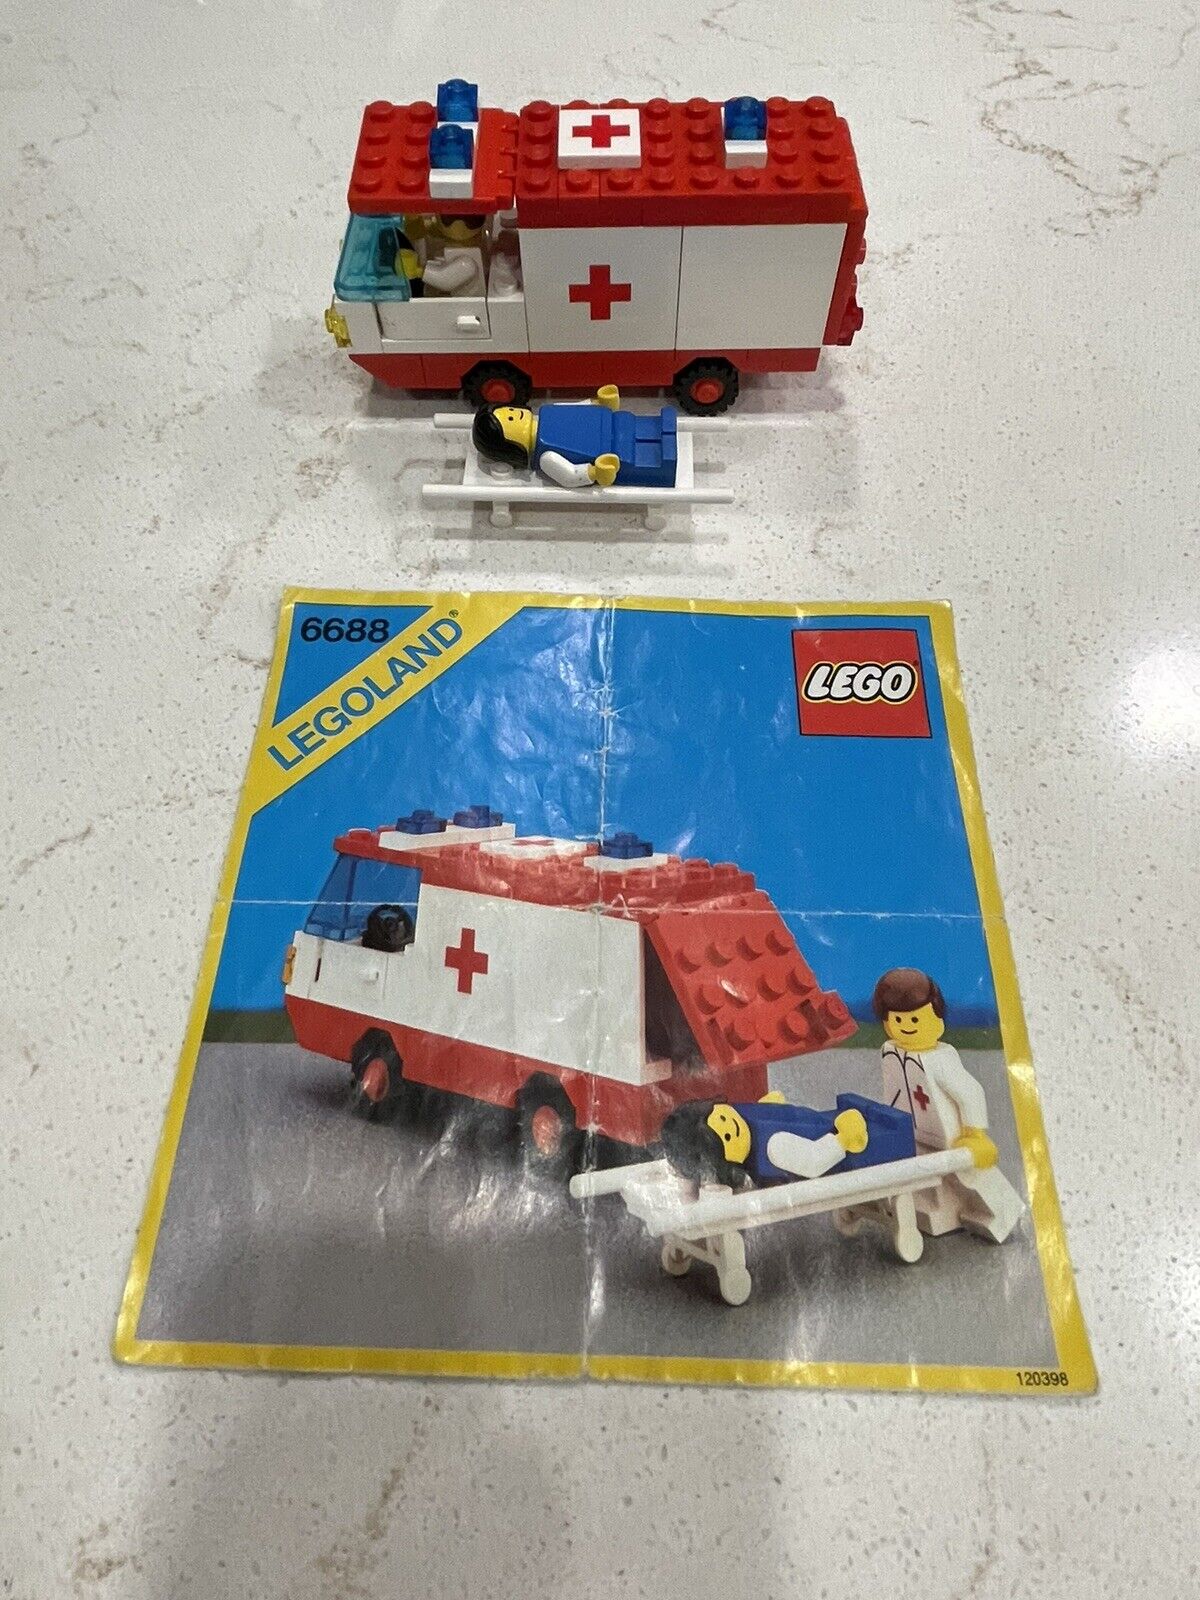 Lego Classic Town 6688 Ambulance Hospital Doctor Car Complete With Instructions